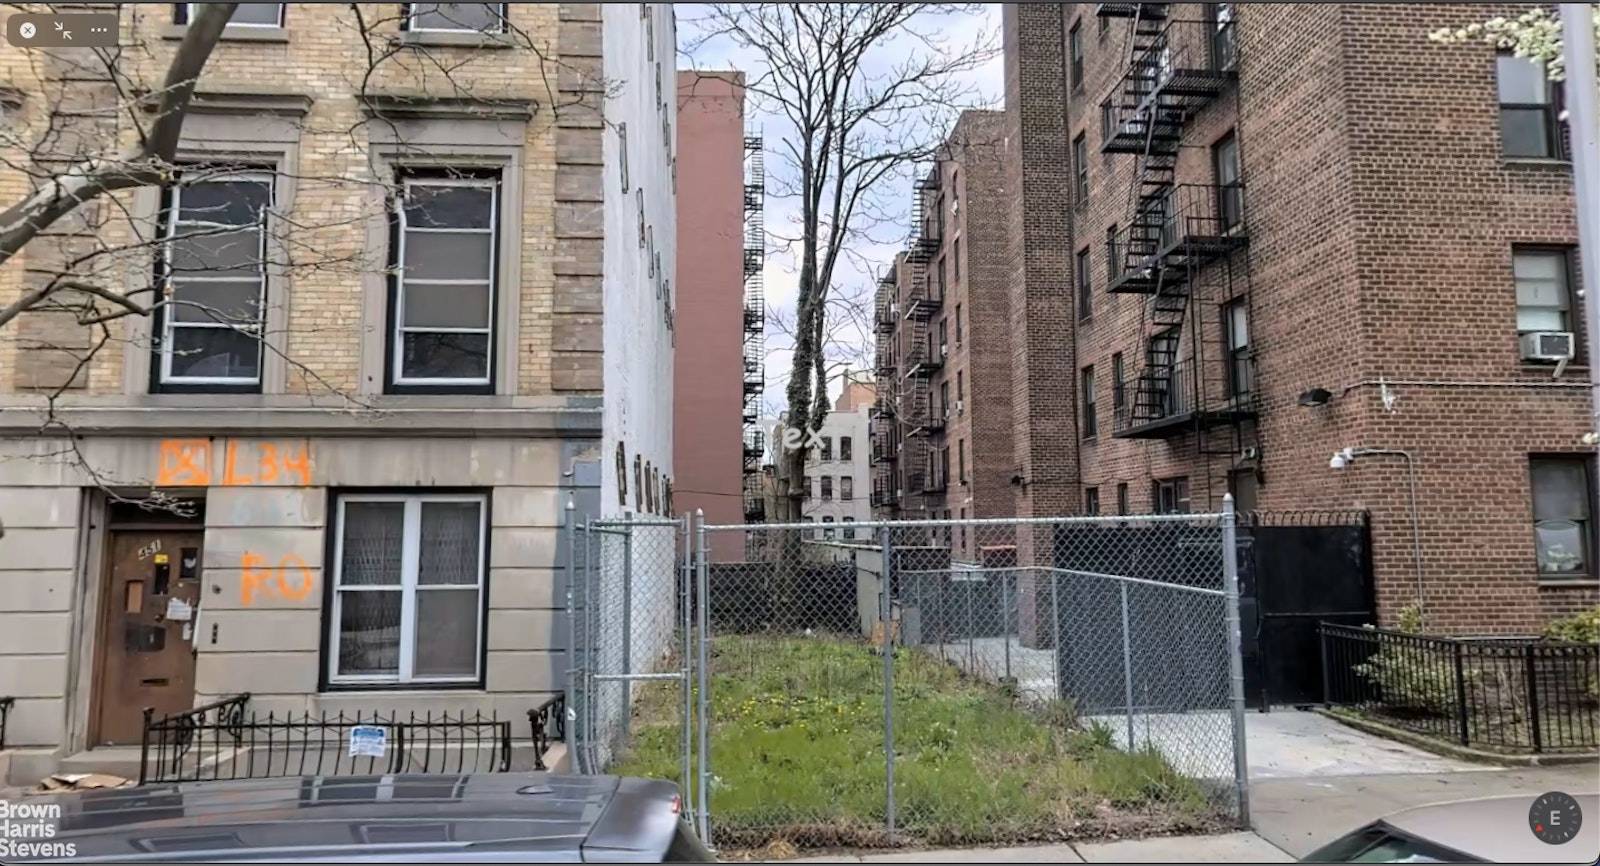 2 Vacant LotsLot Dimensions are 34ft x 68ftZoning Districts R7ATaxes 610Parcel is located near stores, restaurants, supermarkets and near Convent Garden amp ; Dance Theatre of Harlem Local subways near ...